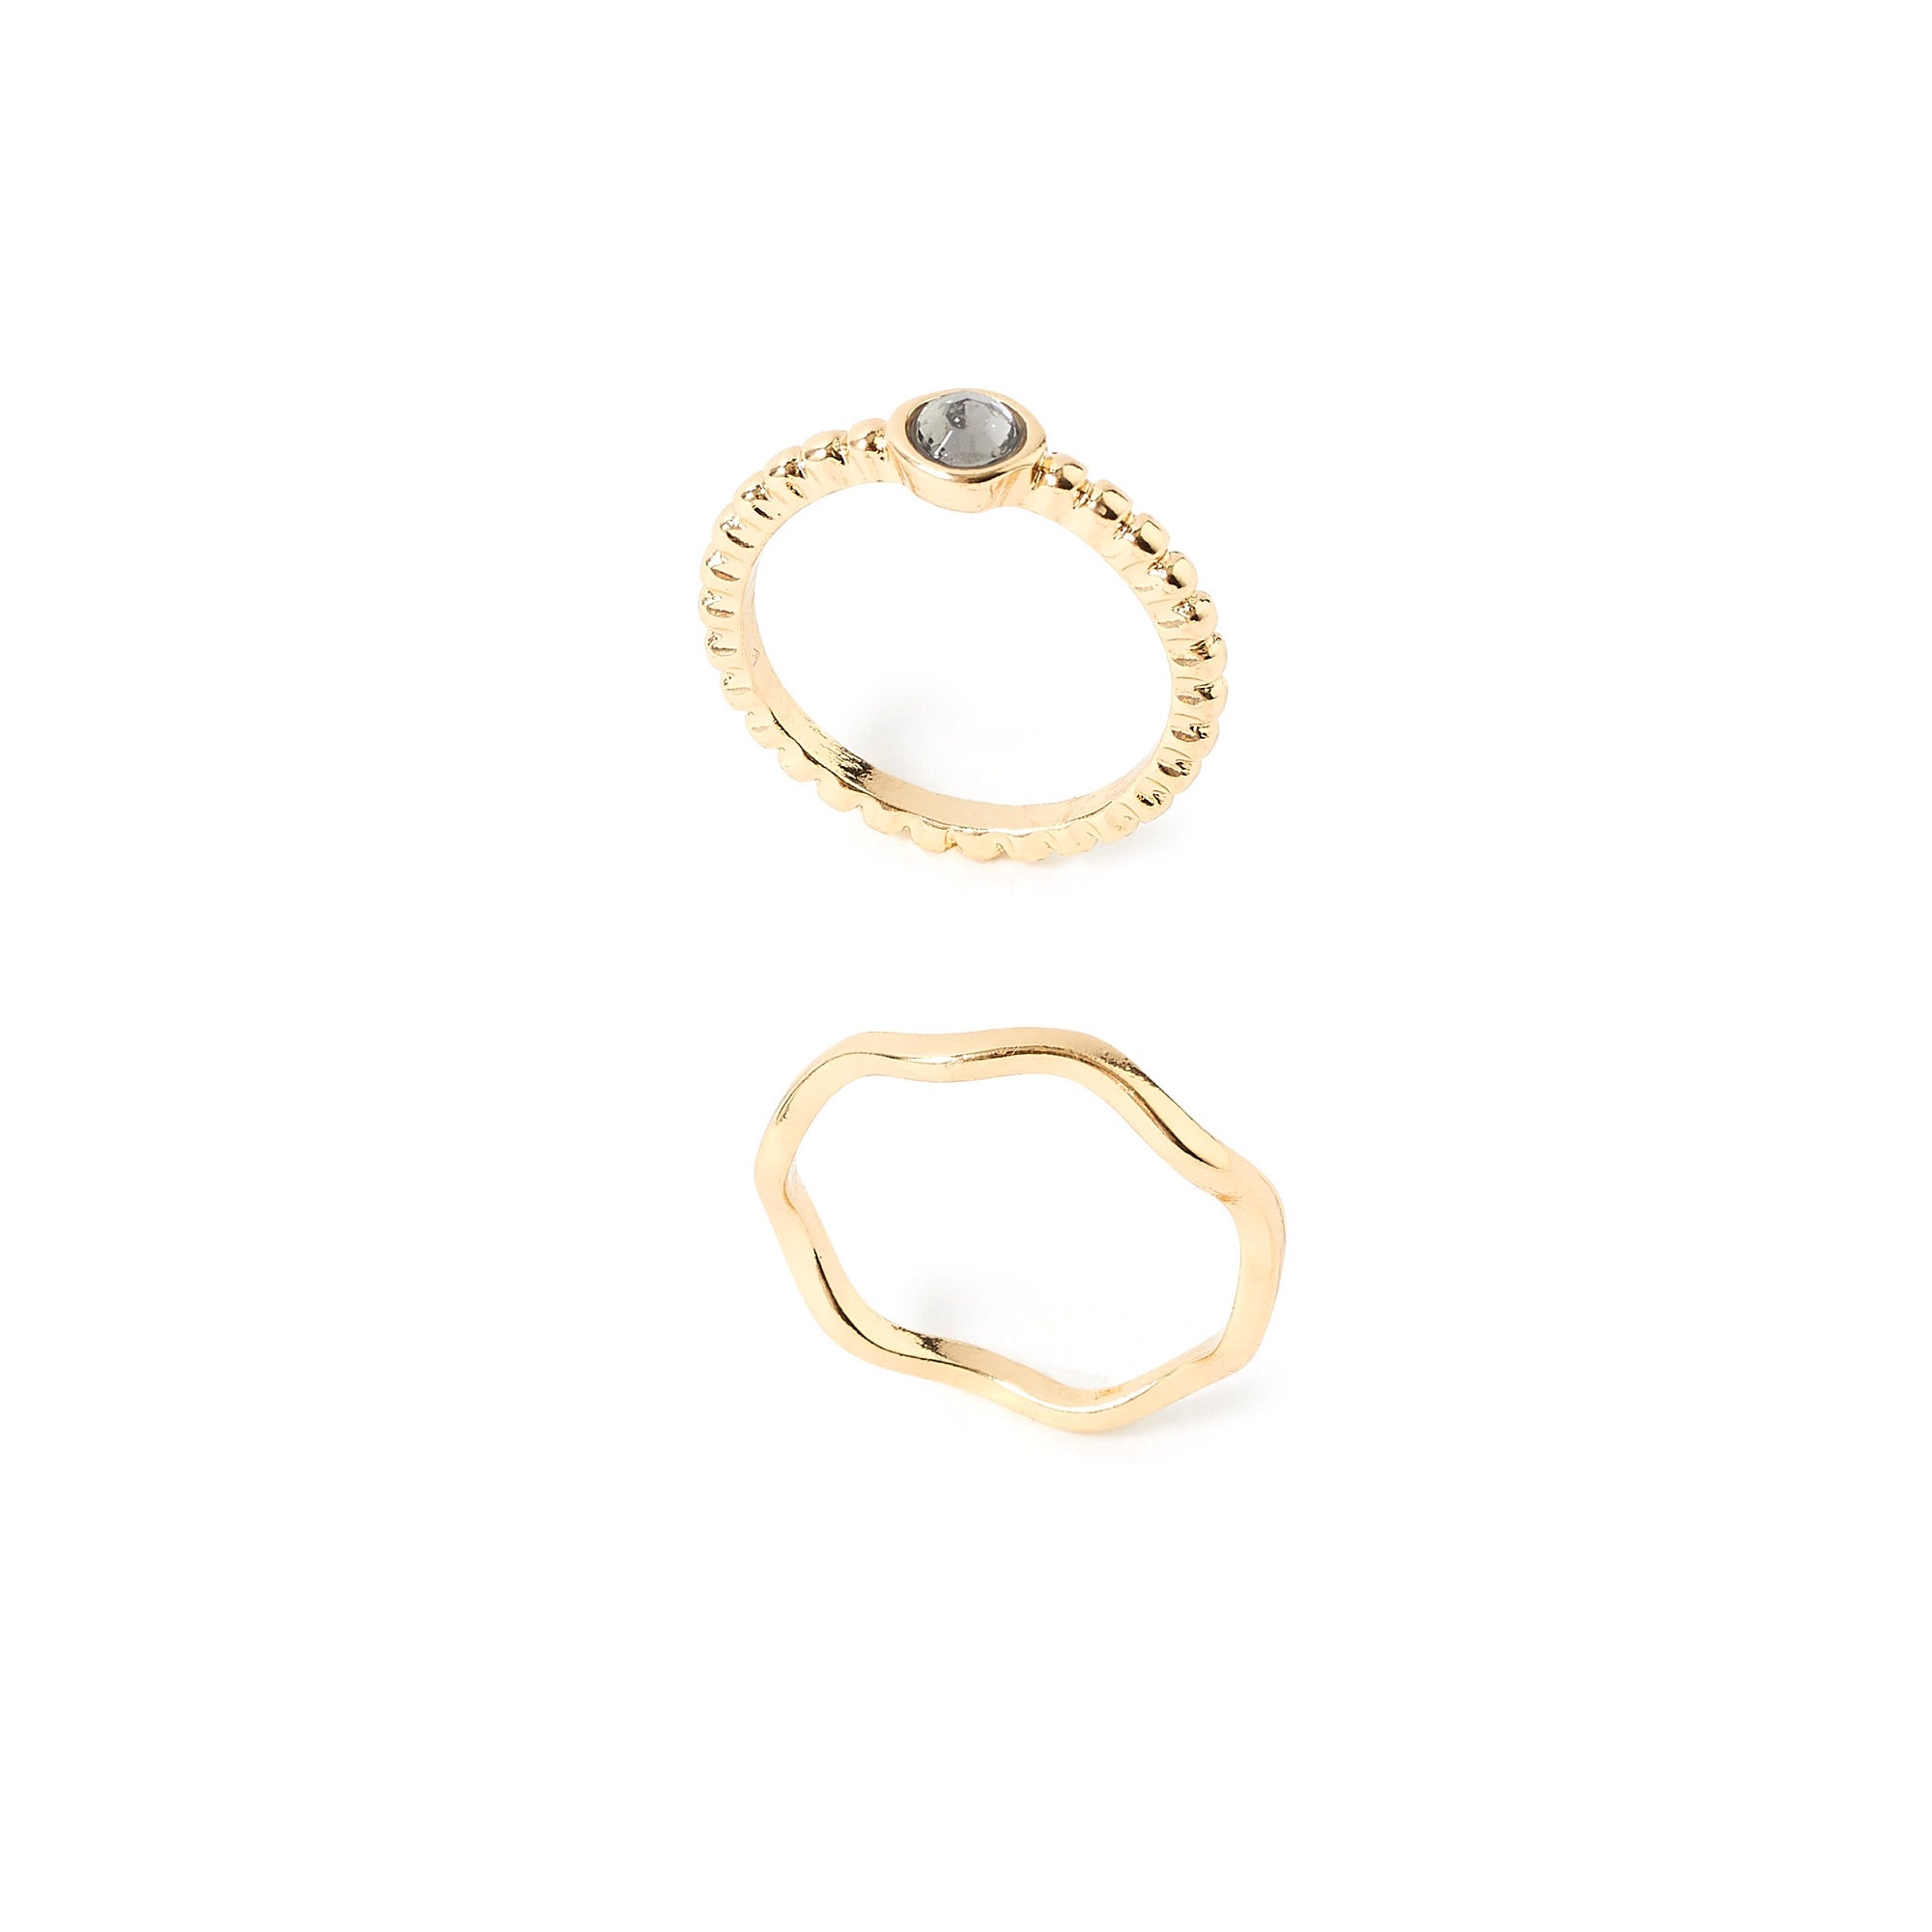 Accessorize London Women's Gold Set of 2 Bubble Stone Stacking Ring Set